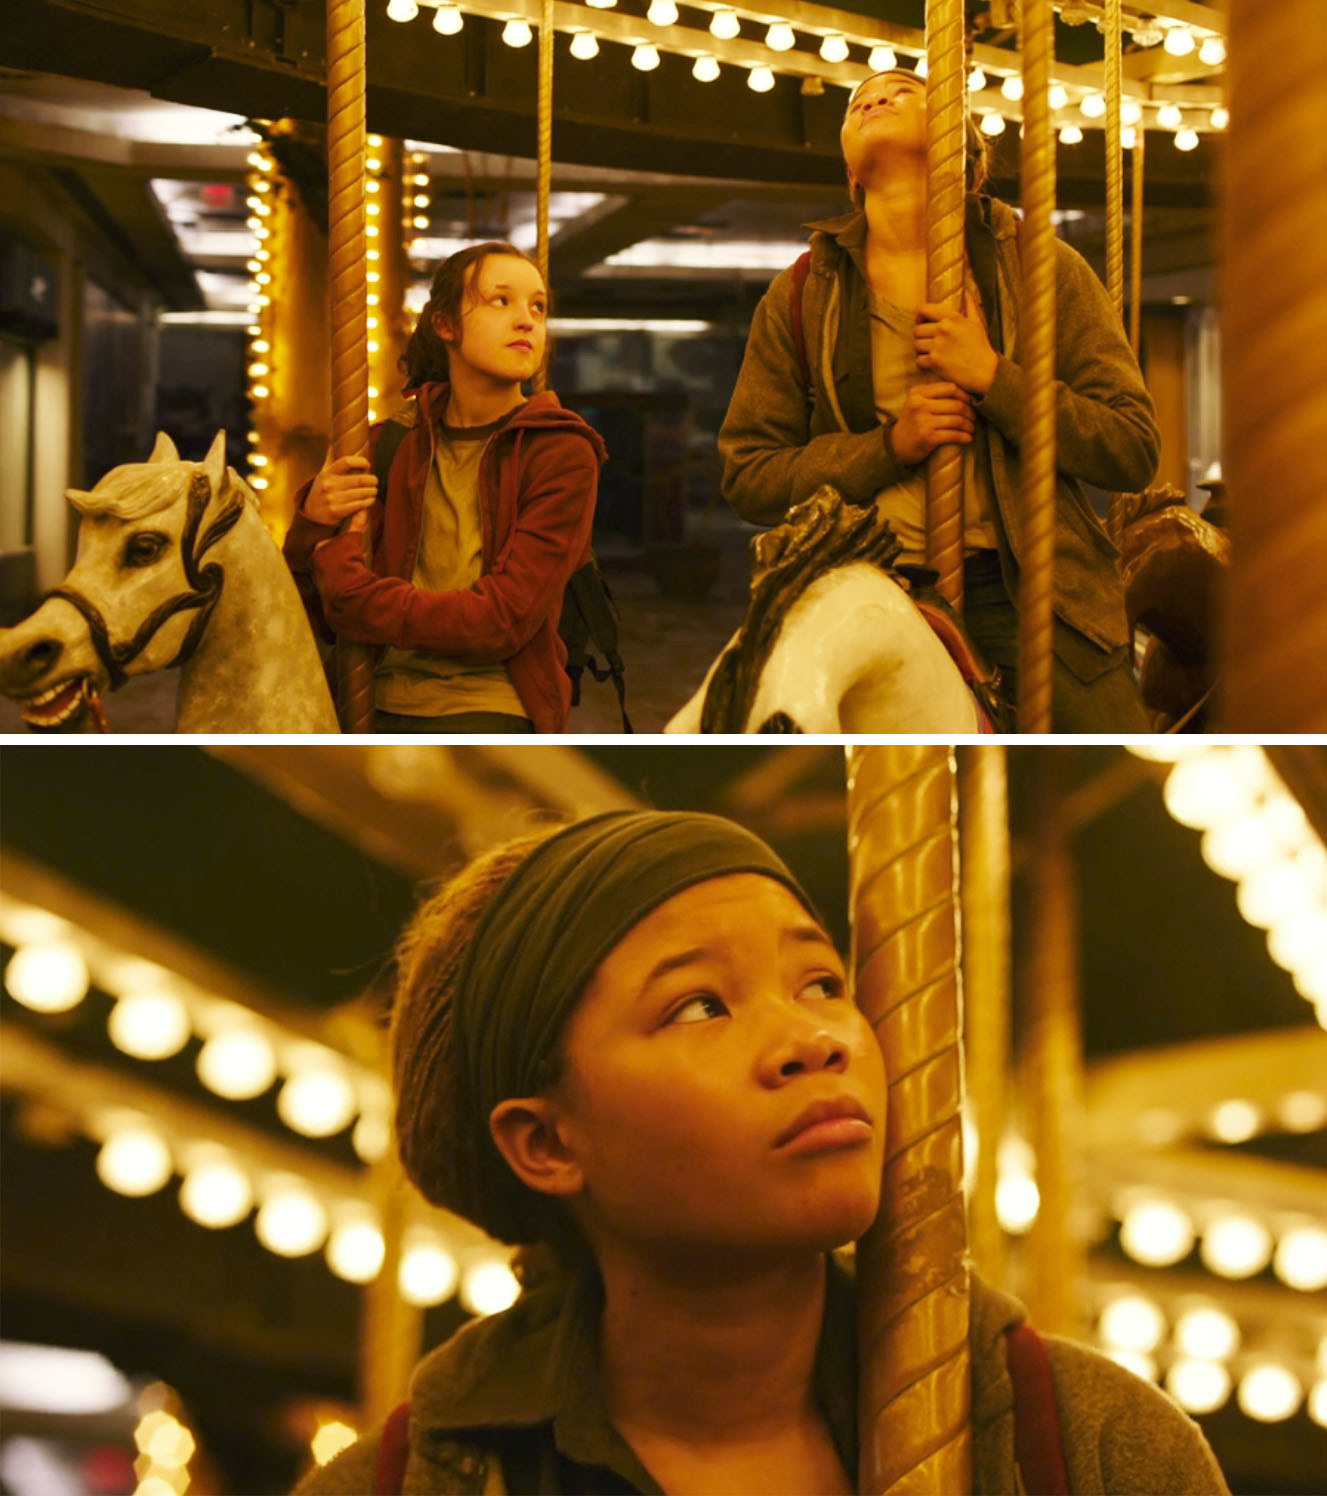 Ellie riding a merry-go-round with a friend in a scene from &quot;The Last of Us&quot;